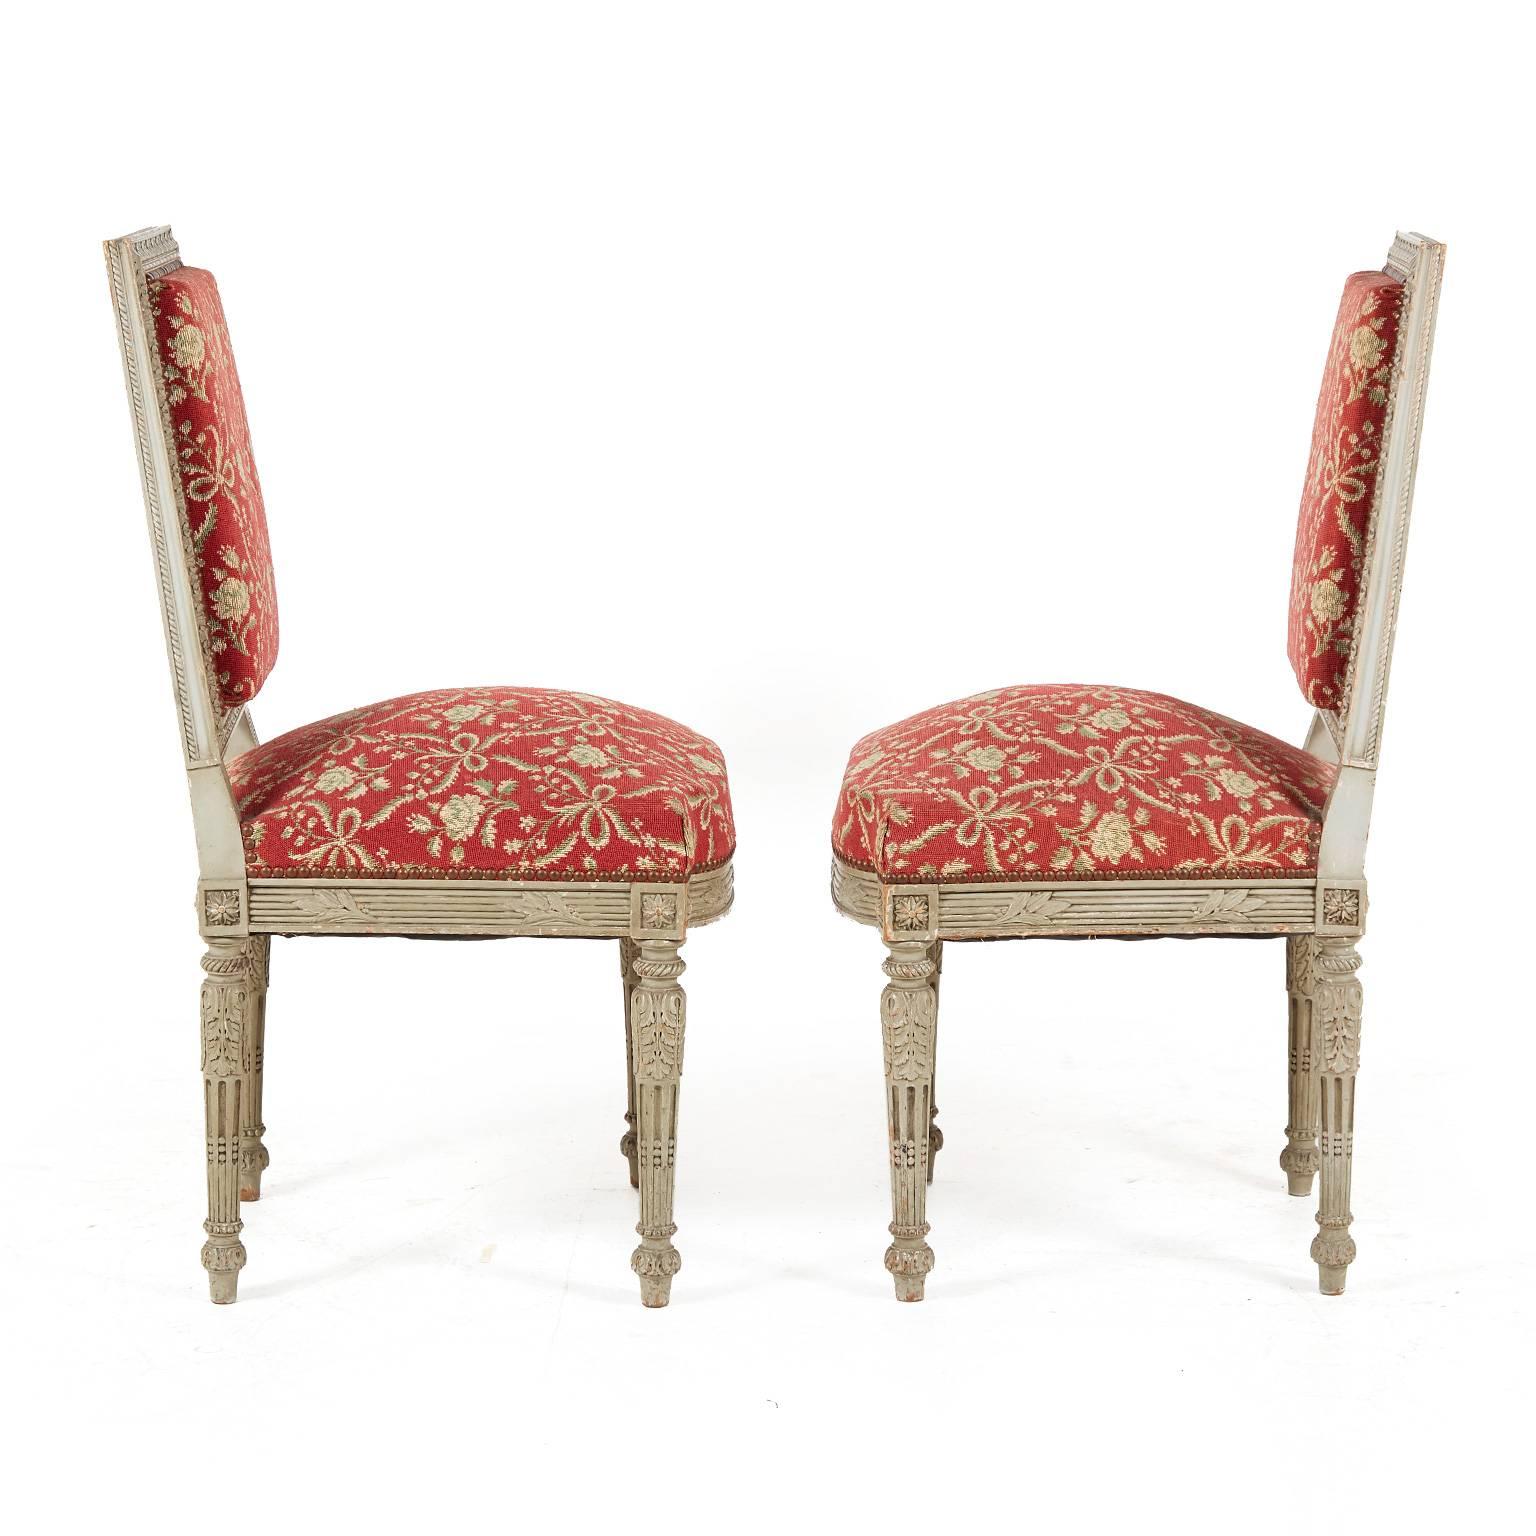 Set of two Louis XVI carved chairs, circa 1780. These are period Louis XVI pieces and the detailing is superior and expertly hand-carved maple. Hand-embedded studding around the upholstery. These are a must-see and have recently been